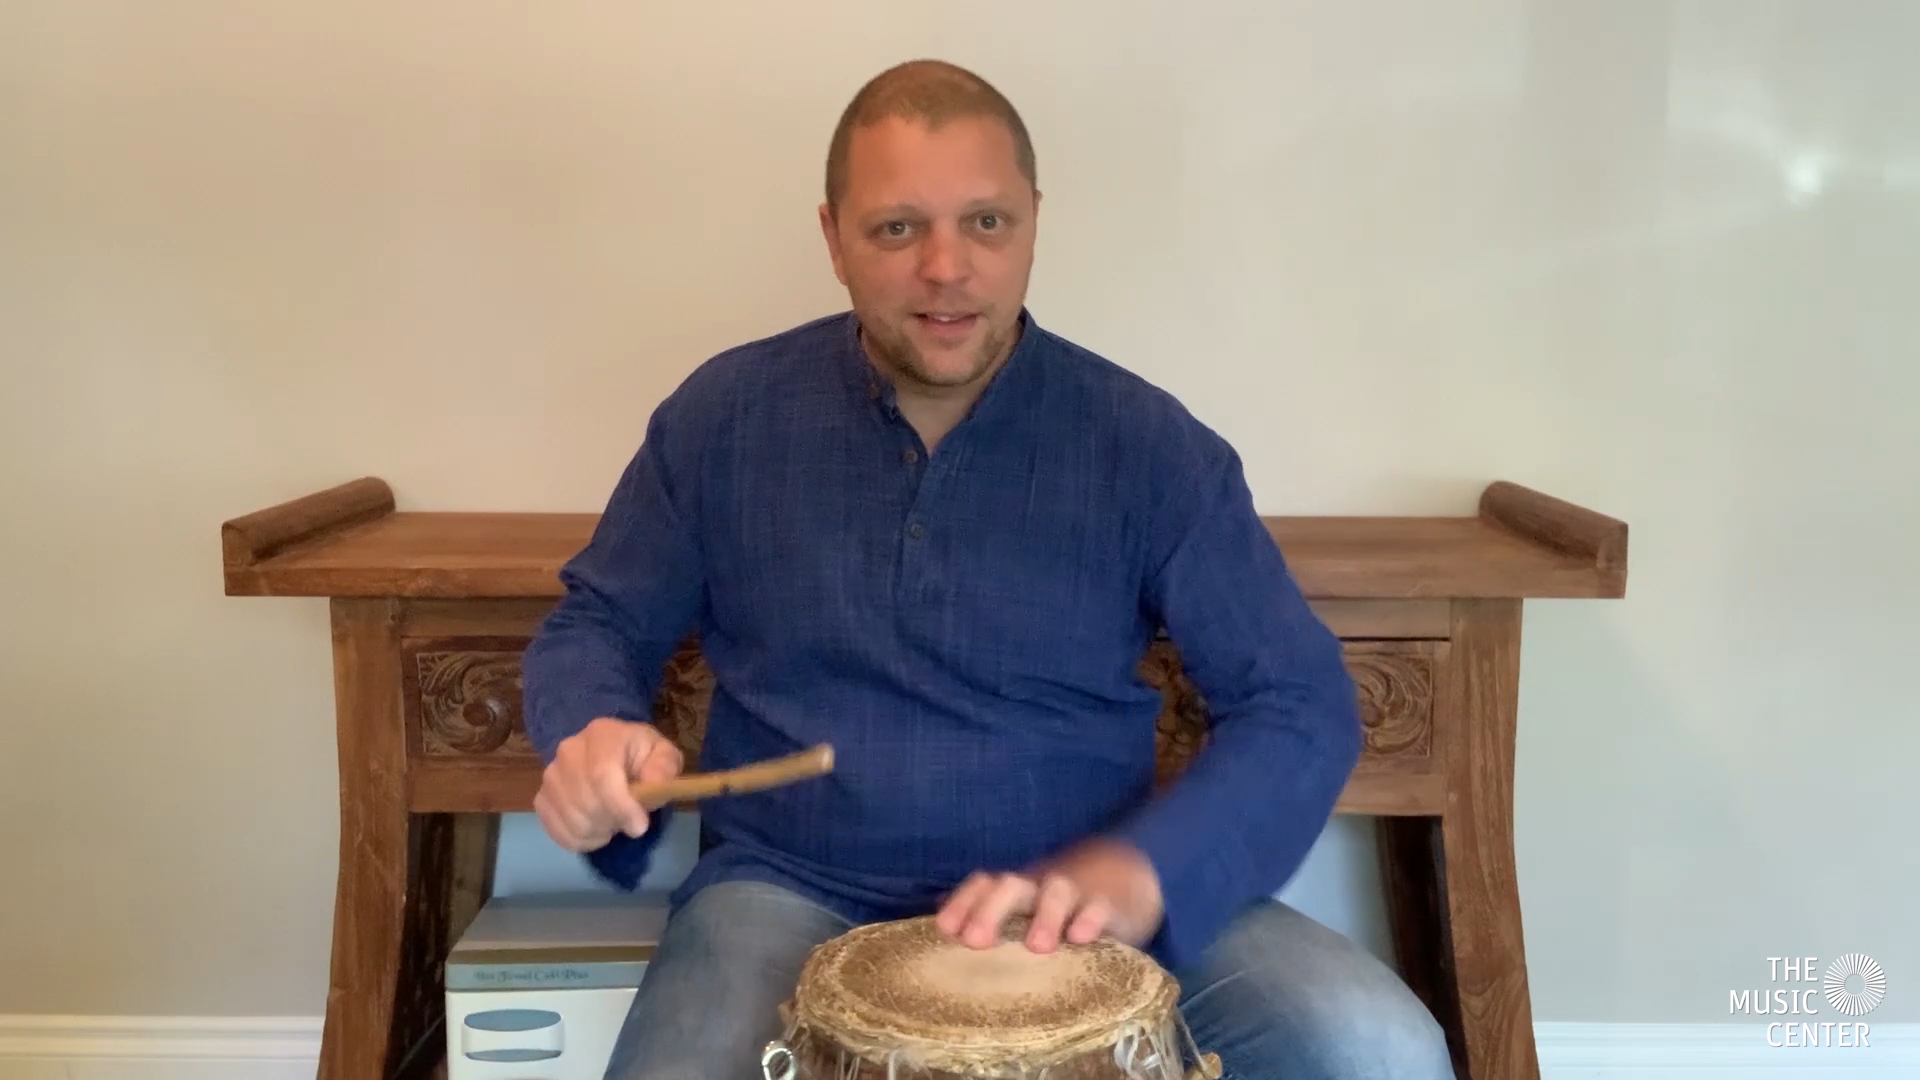 Making Rhythms with Andrew Grueschow